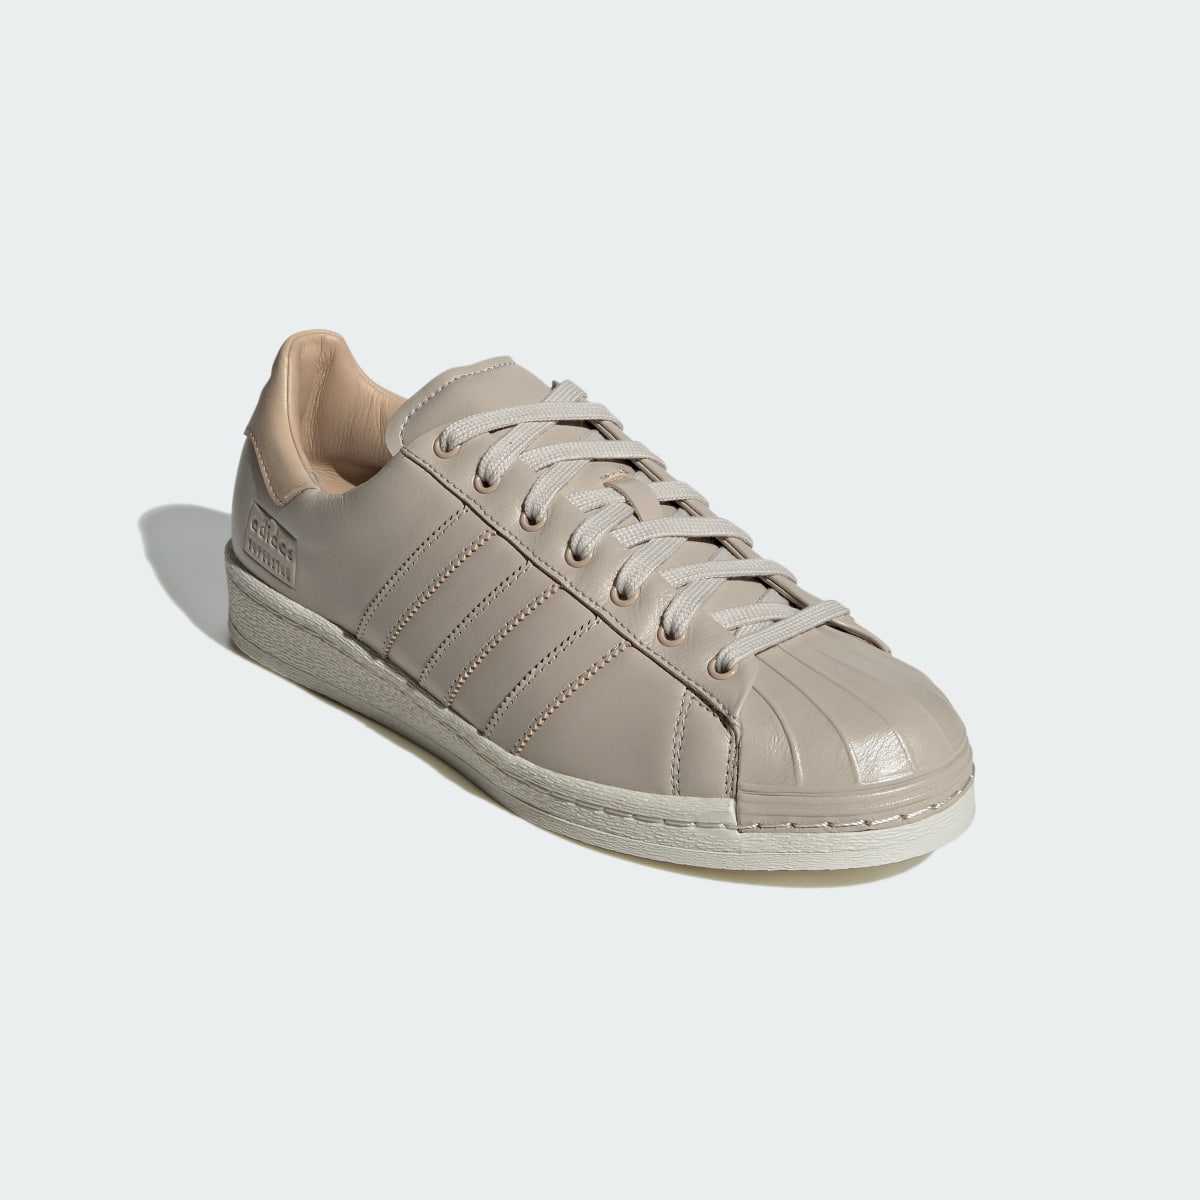 Adidas Superstar Lux Shoes. 5